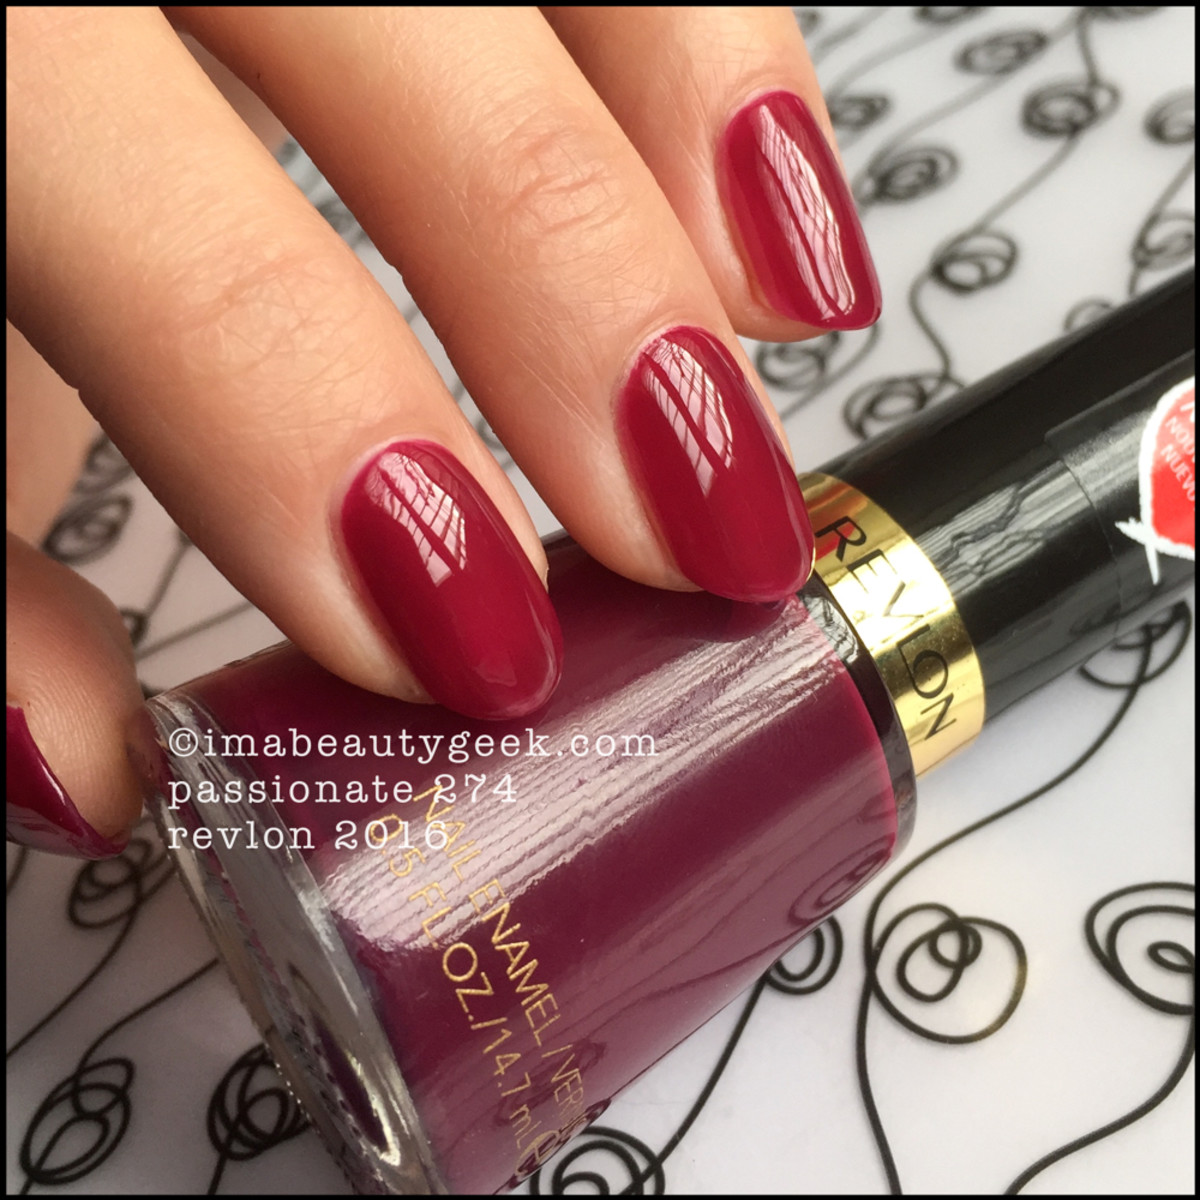 REVLON 2016 NAIL POLISH SWATCHES AND REVIEW - Beautygeeks